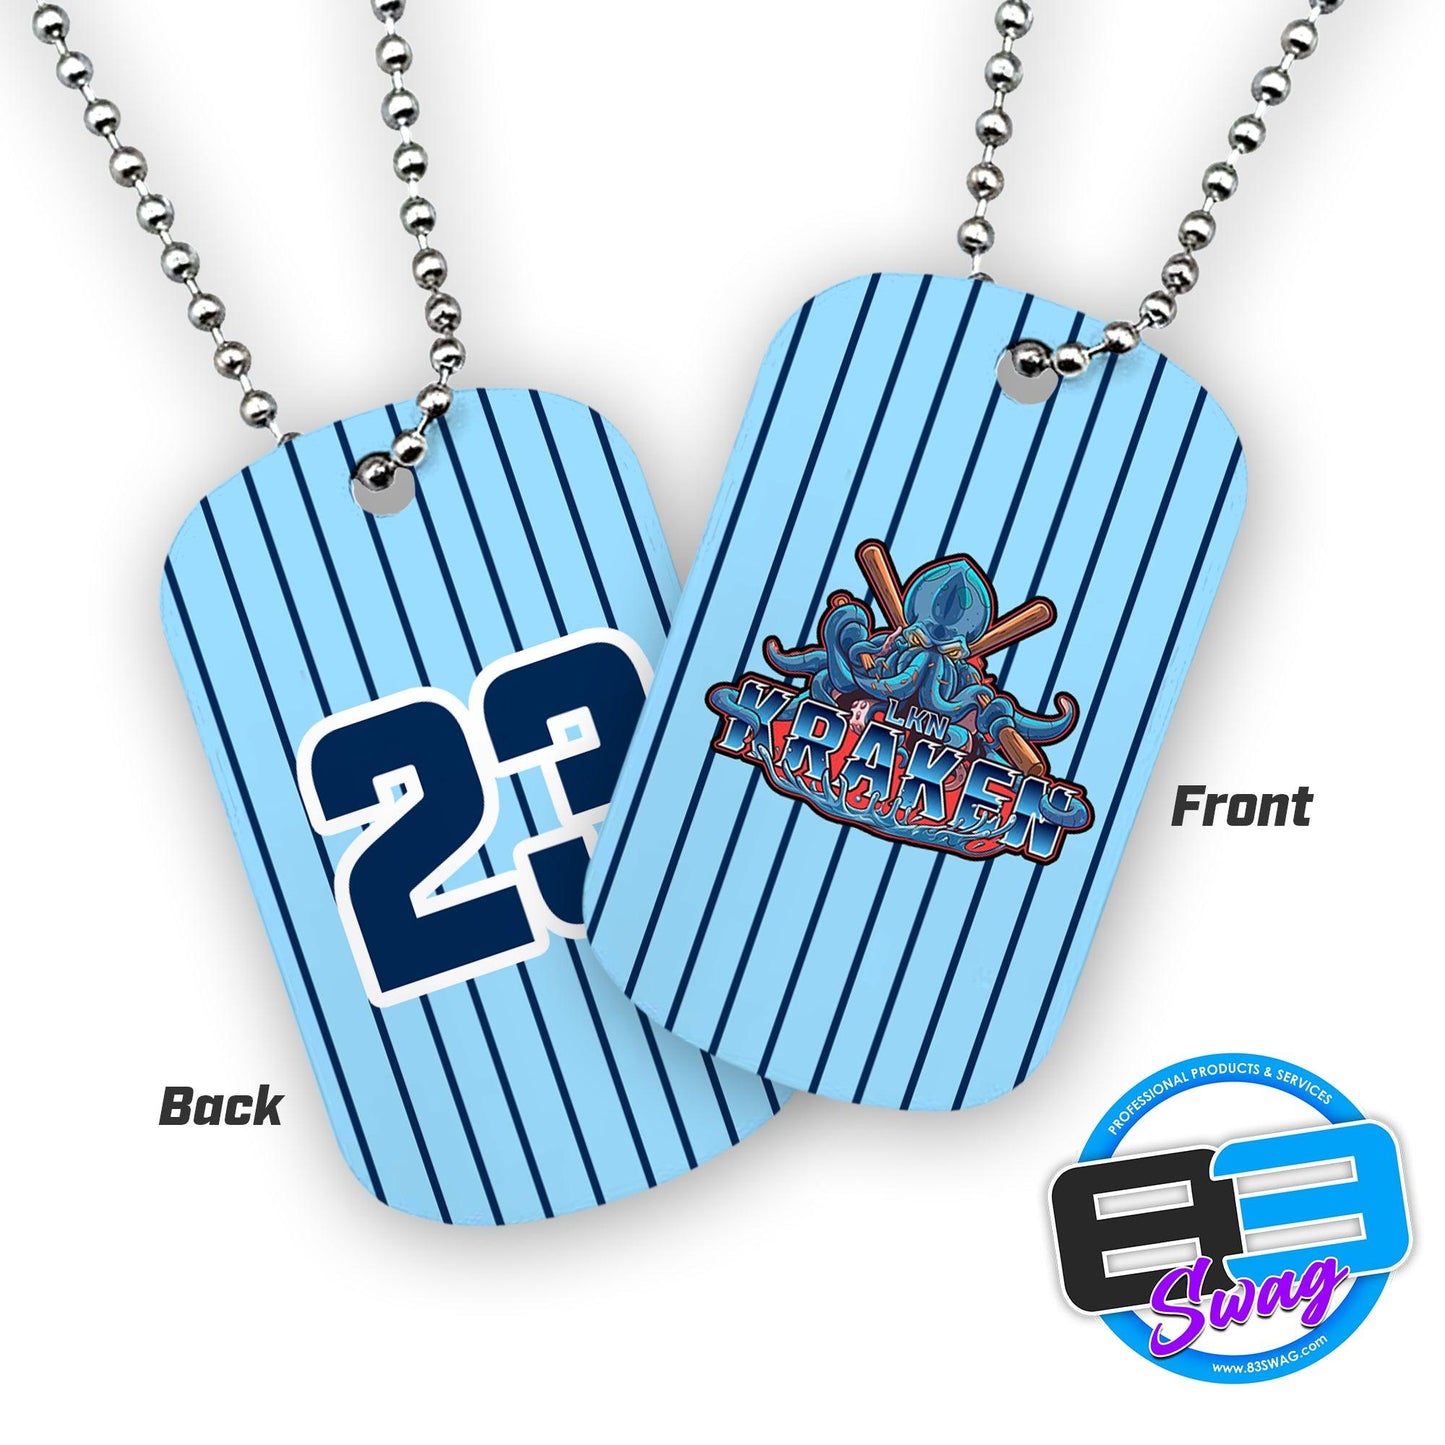 Double Sided Dog Tags - Includes Chain - LKN Kraken - 83Swag